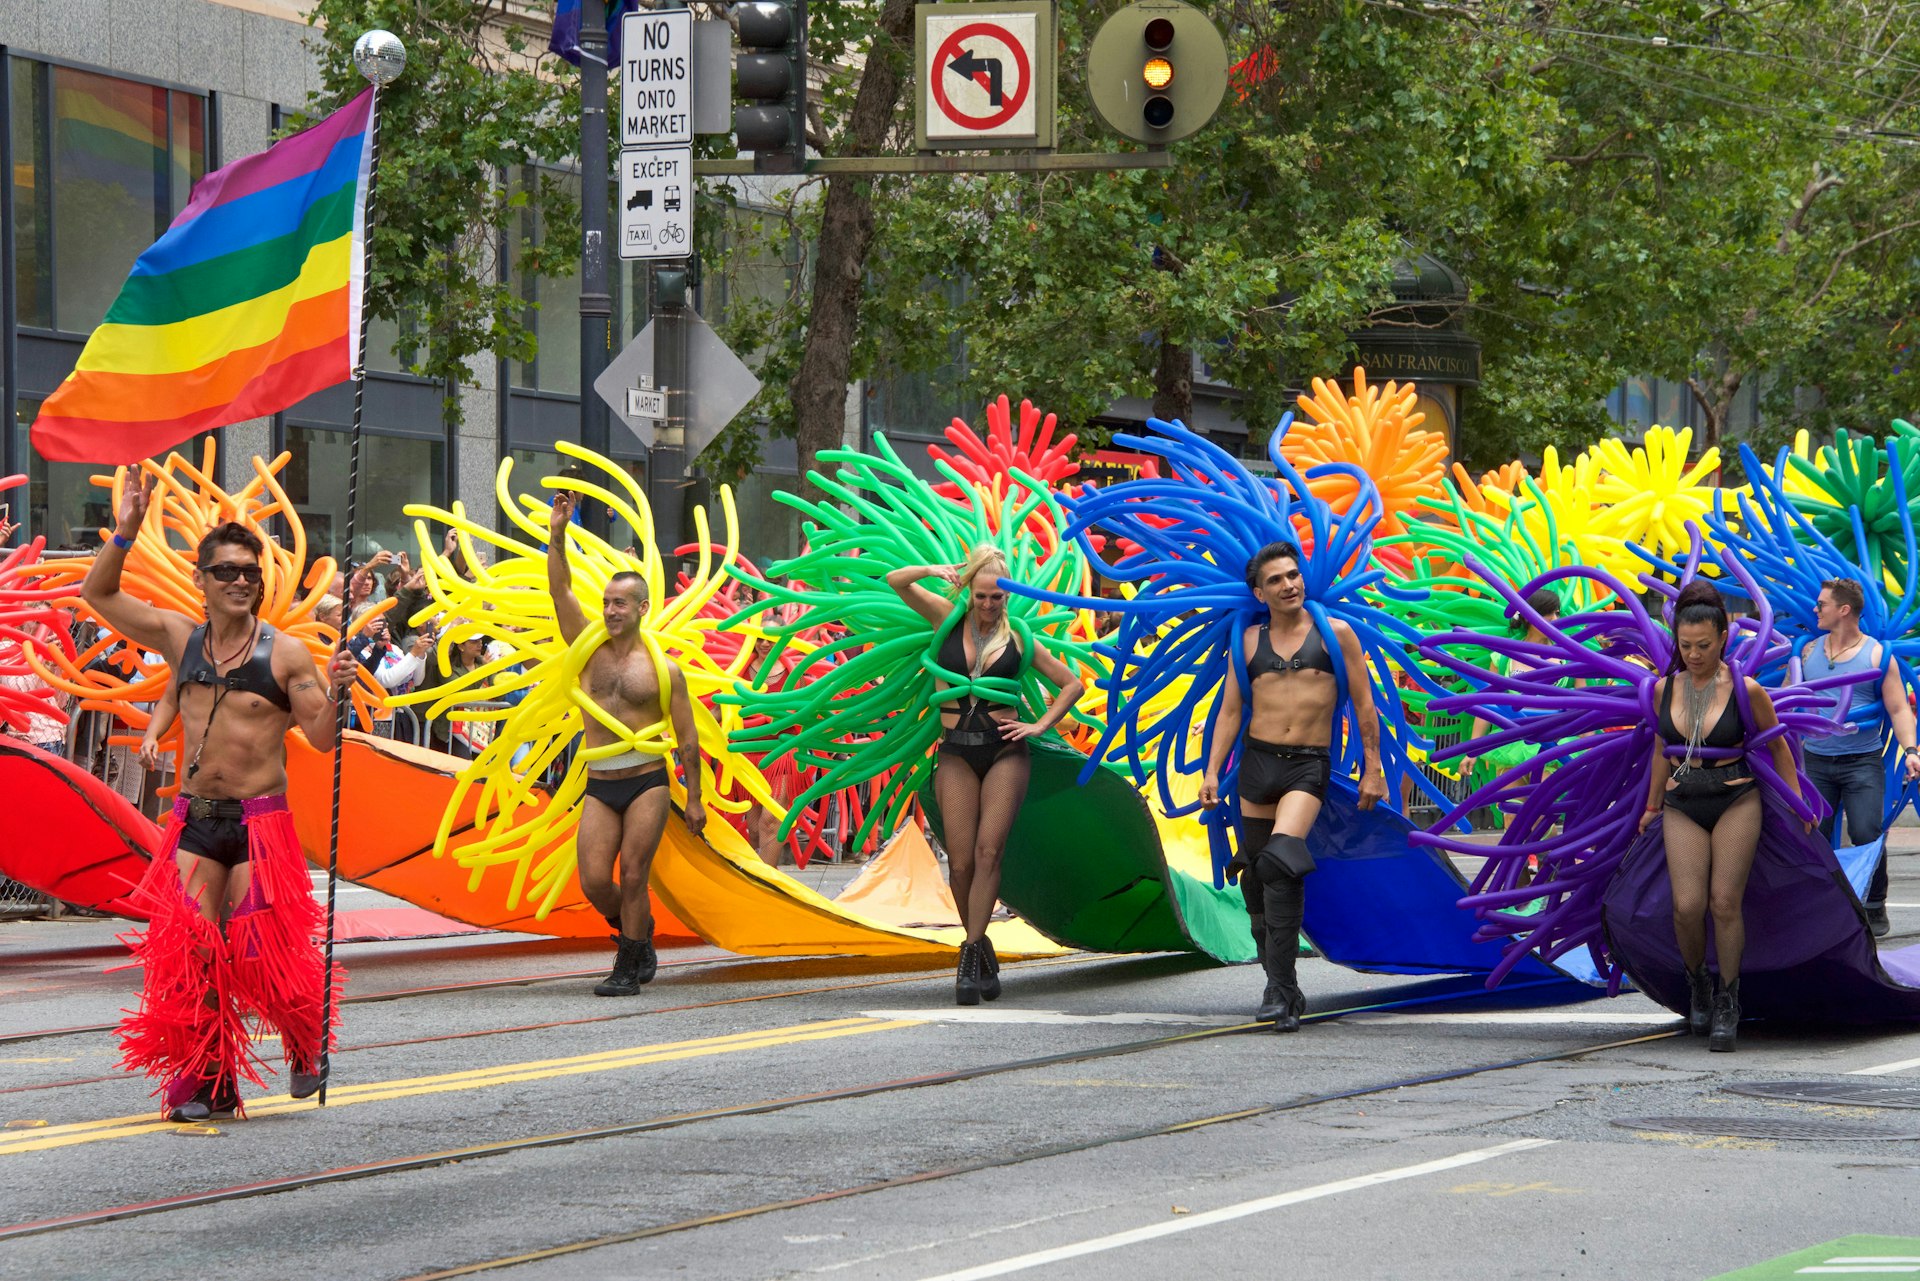 People take part in a parade wearing pants and shoes with colorful balloons attached to them